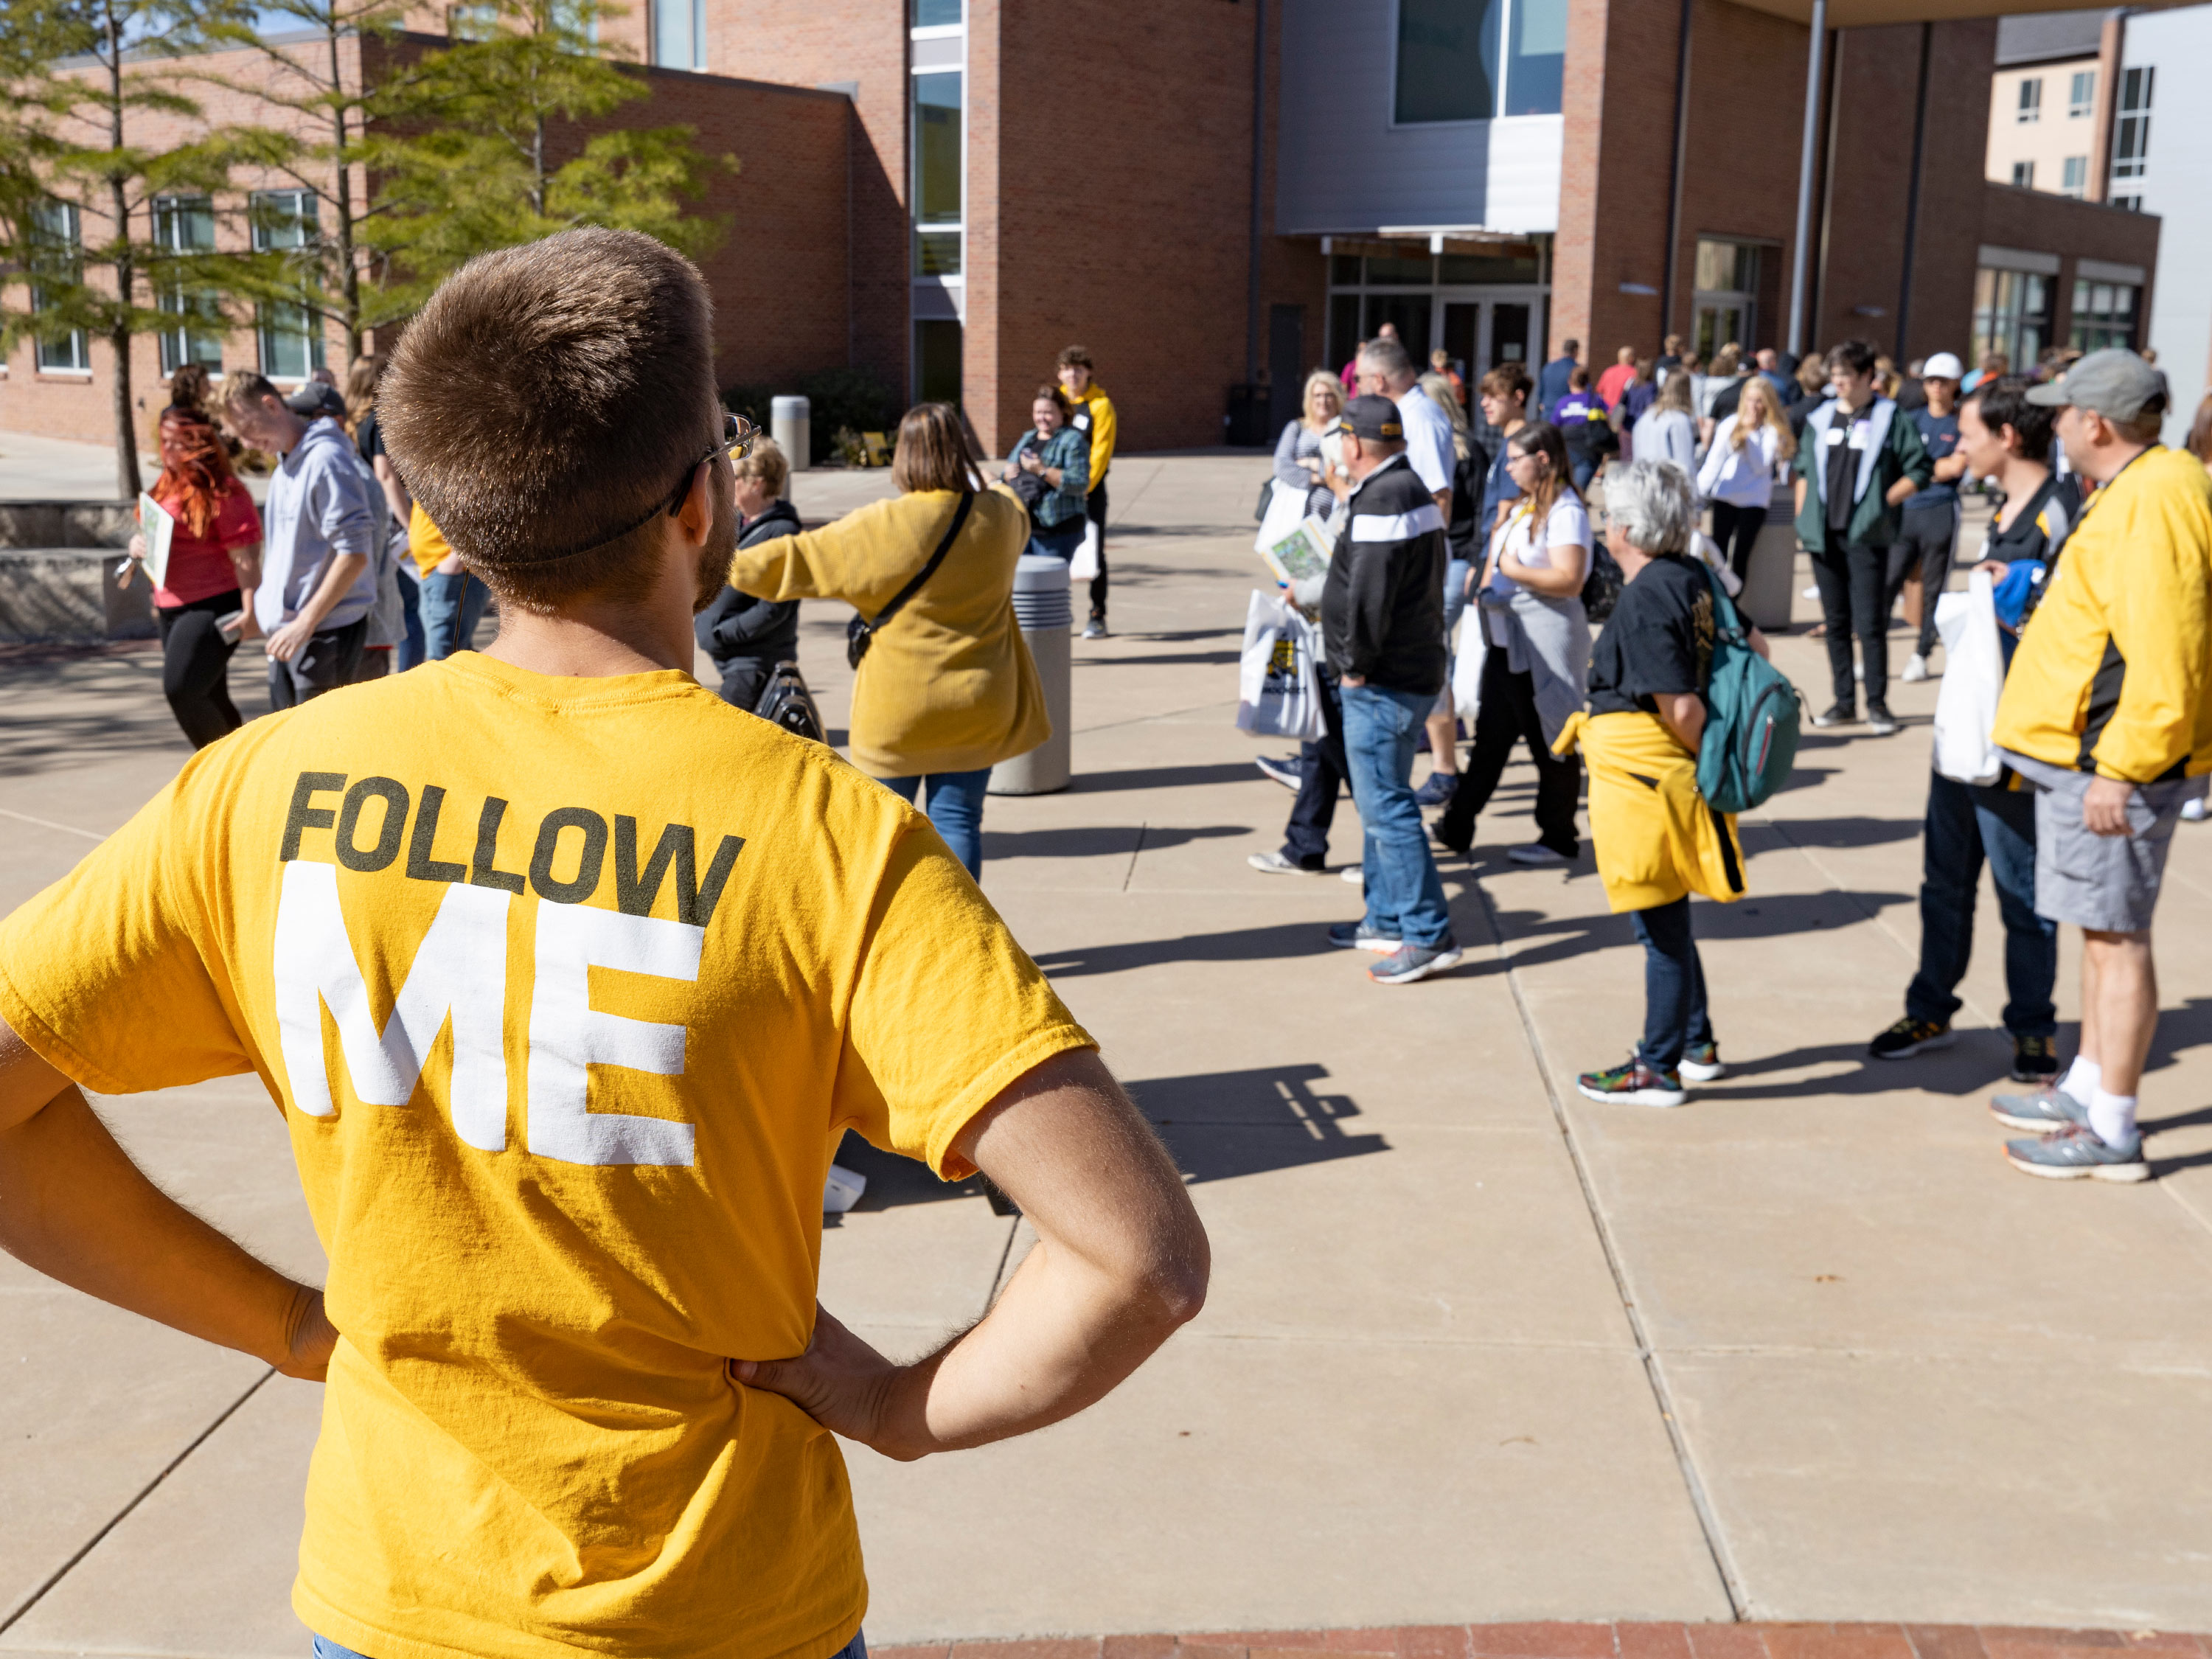 A Shocker Navigator leads a group on a campus tour of Wichita State University